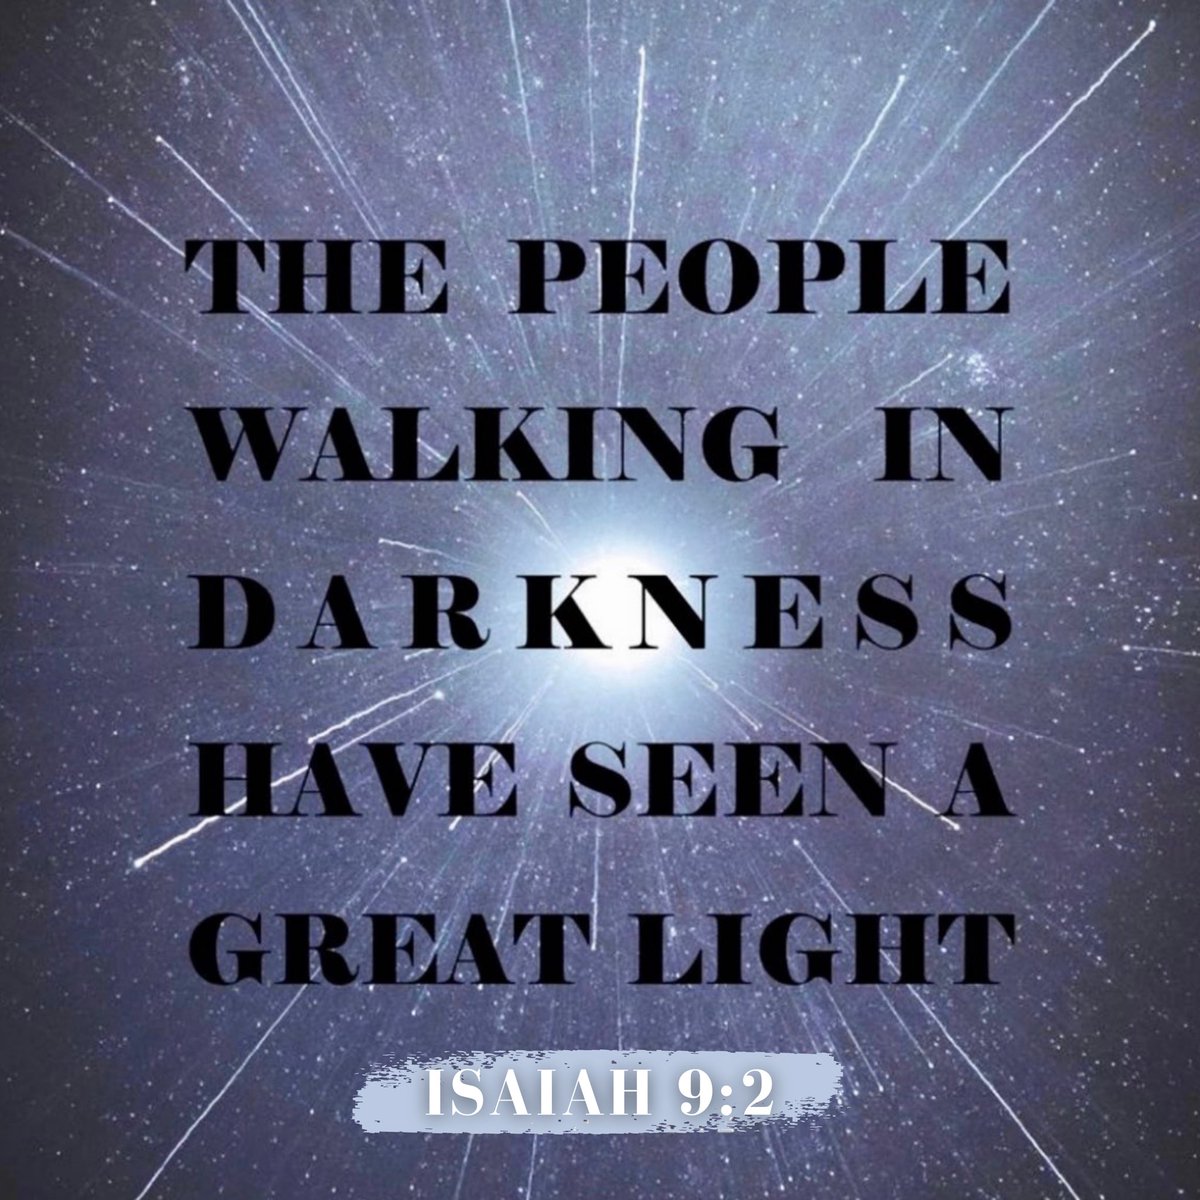 Isaiah 9:2 — The people who walk in darkness will see a great light. A light will shine on those who live in the land of the shadow of death.